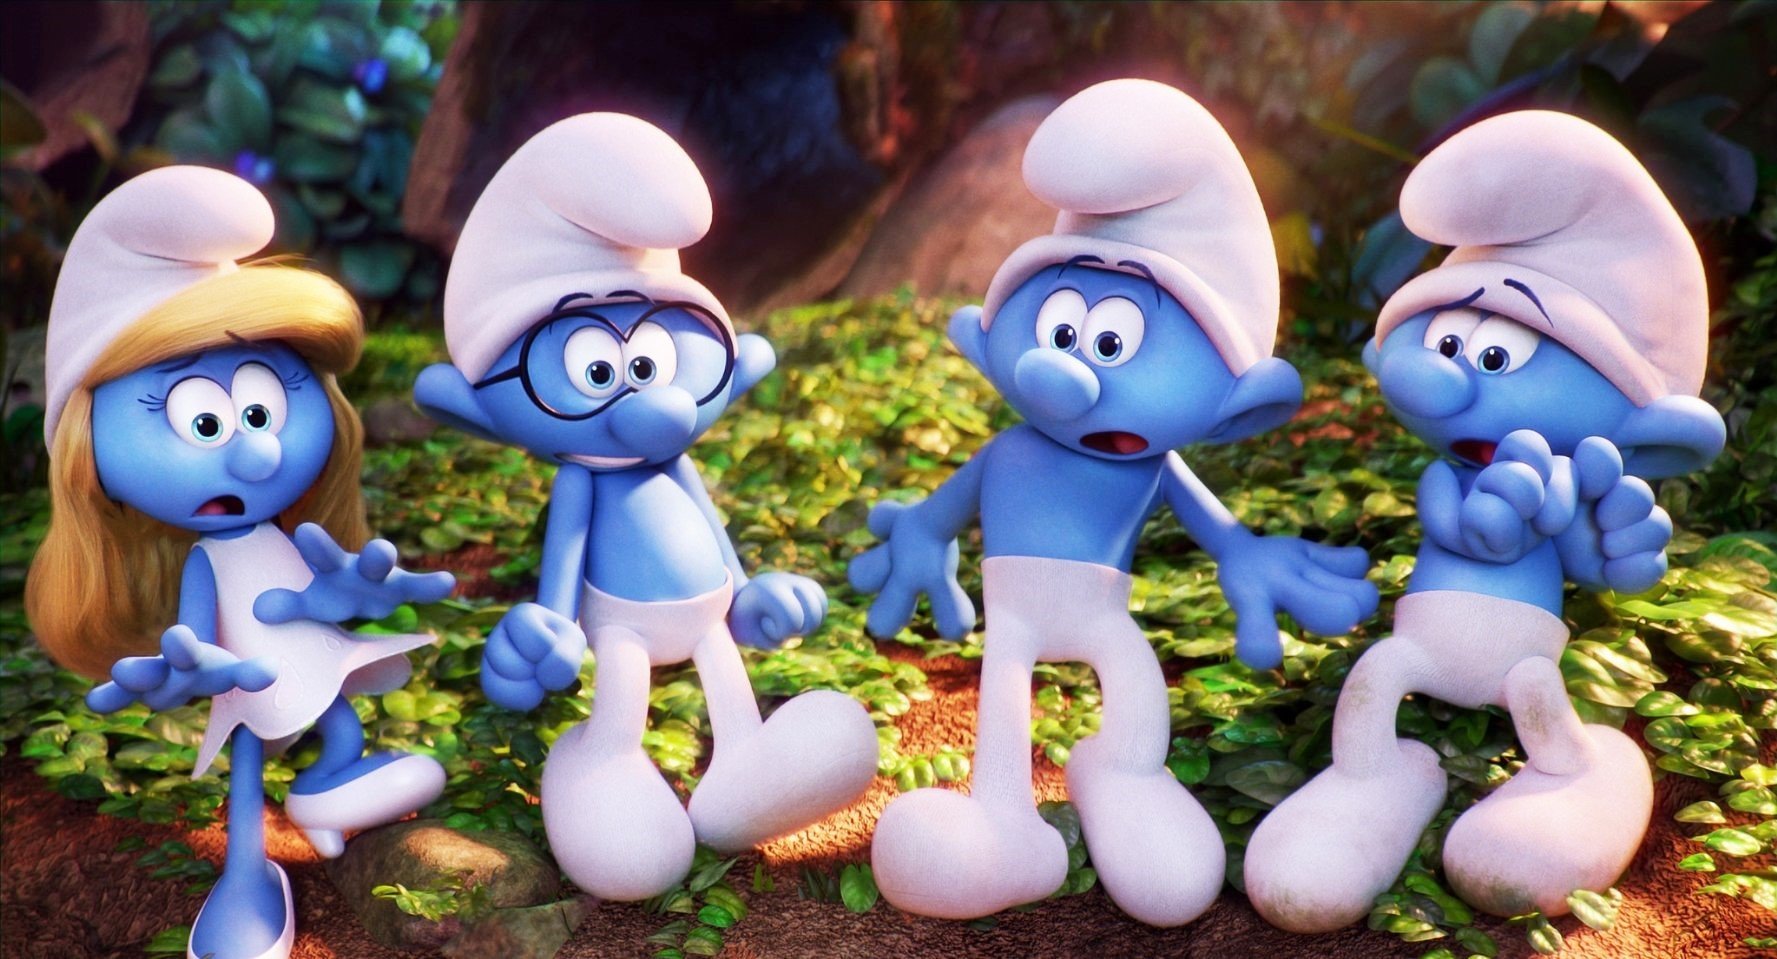 A scene from Columbia Pictures' Smurfs: The Lost Village (2017)